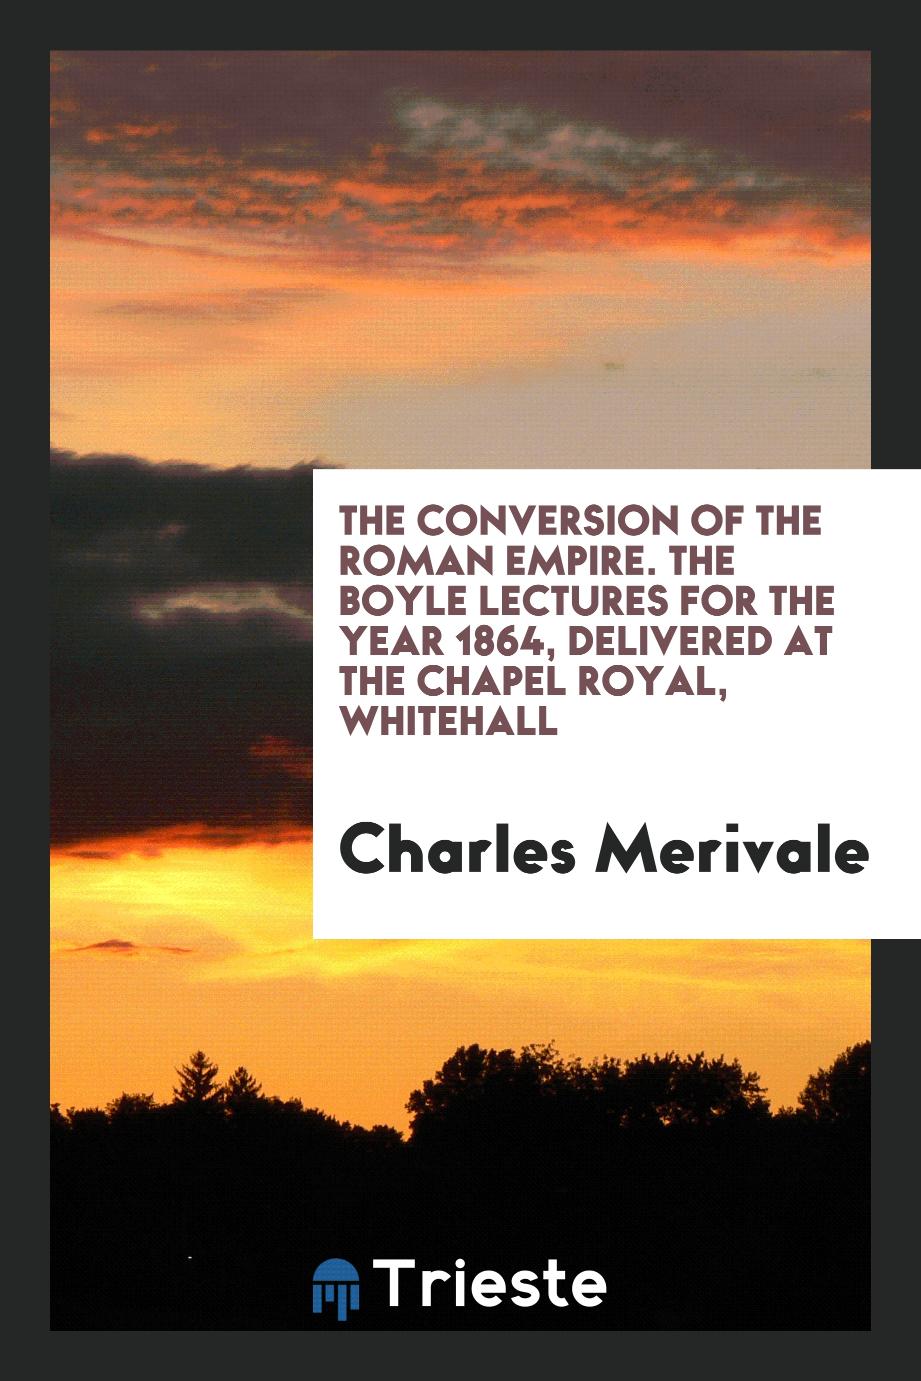 The Conversion of the Roman Empire. The Boyle Lectures for the Year 1864, Delivered at the Chapel Royal, Whitehall